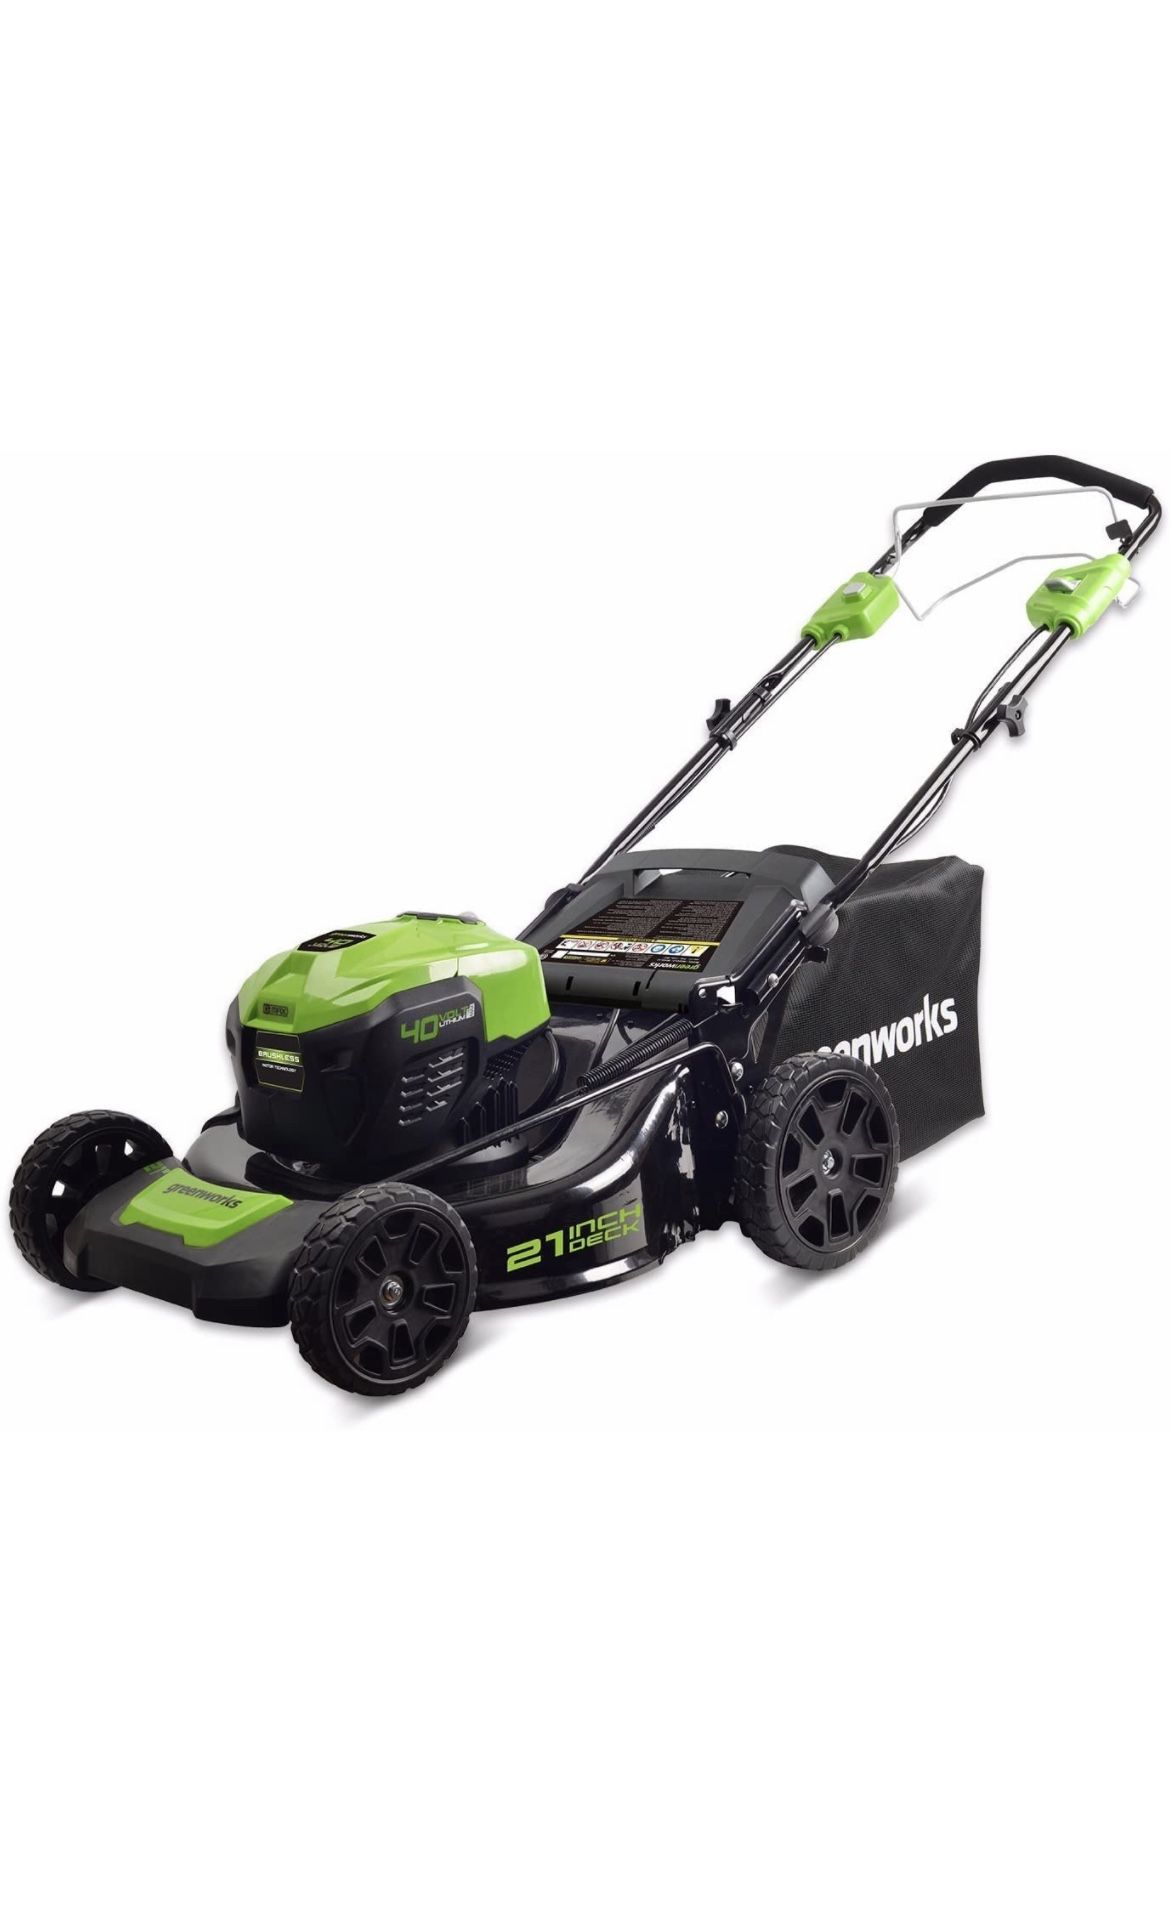 14- 65 Greenworks 40V 21 inch Self-Propelled Cordless Lawn Mower, Battery Not Included MO40L02